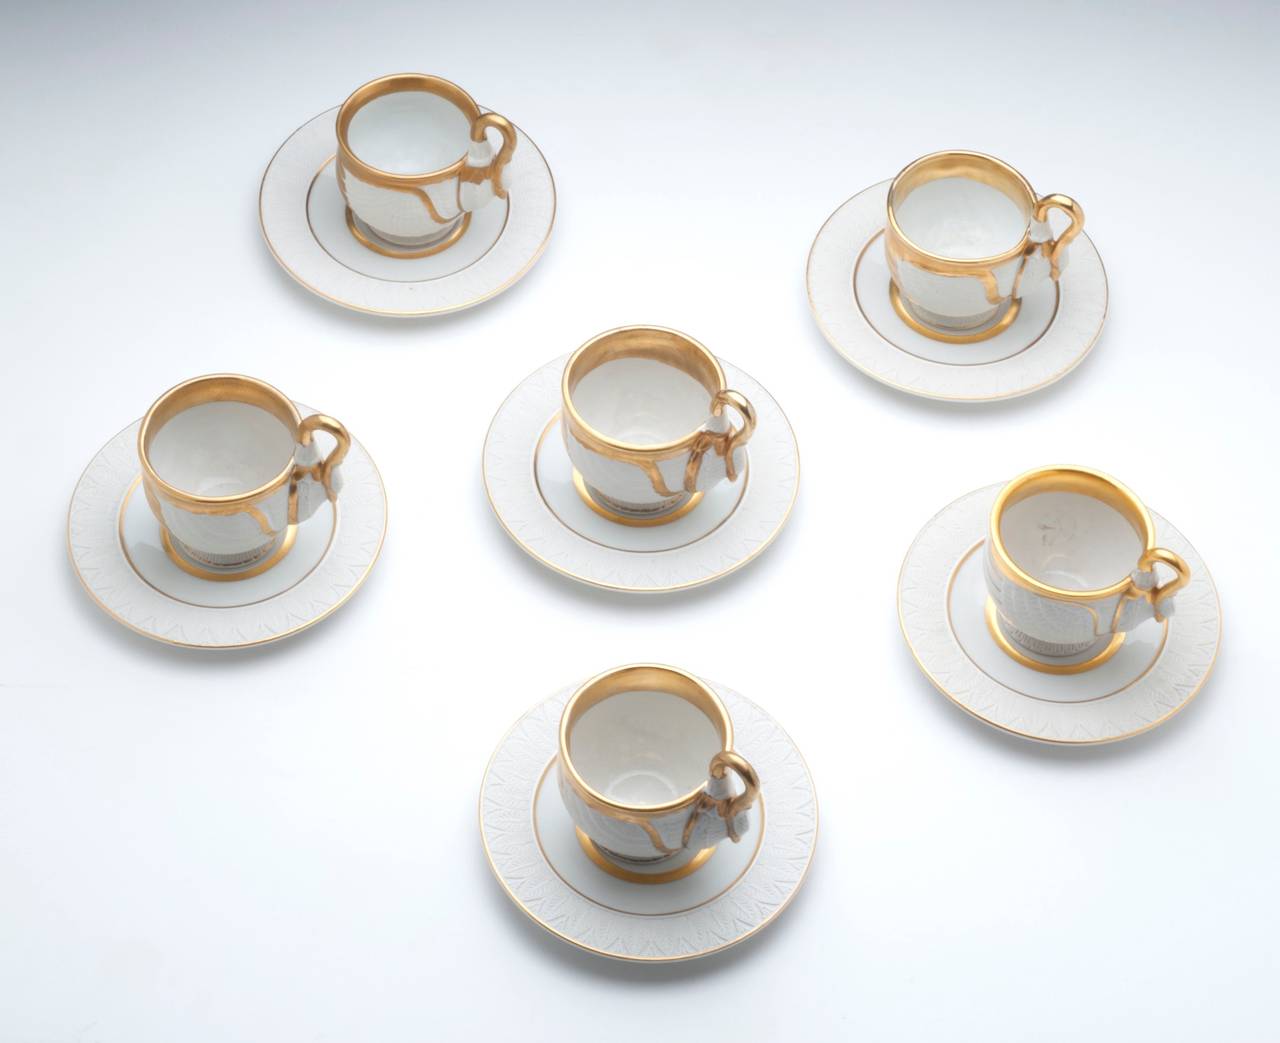 Six Meissen Dresden style Swan Cups and Saucers, circa 1955
after a Meissen design from 1820
Marked RPM on the bottom of the saucer